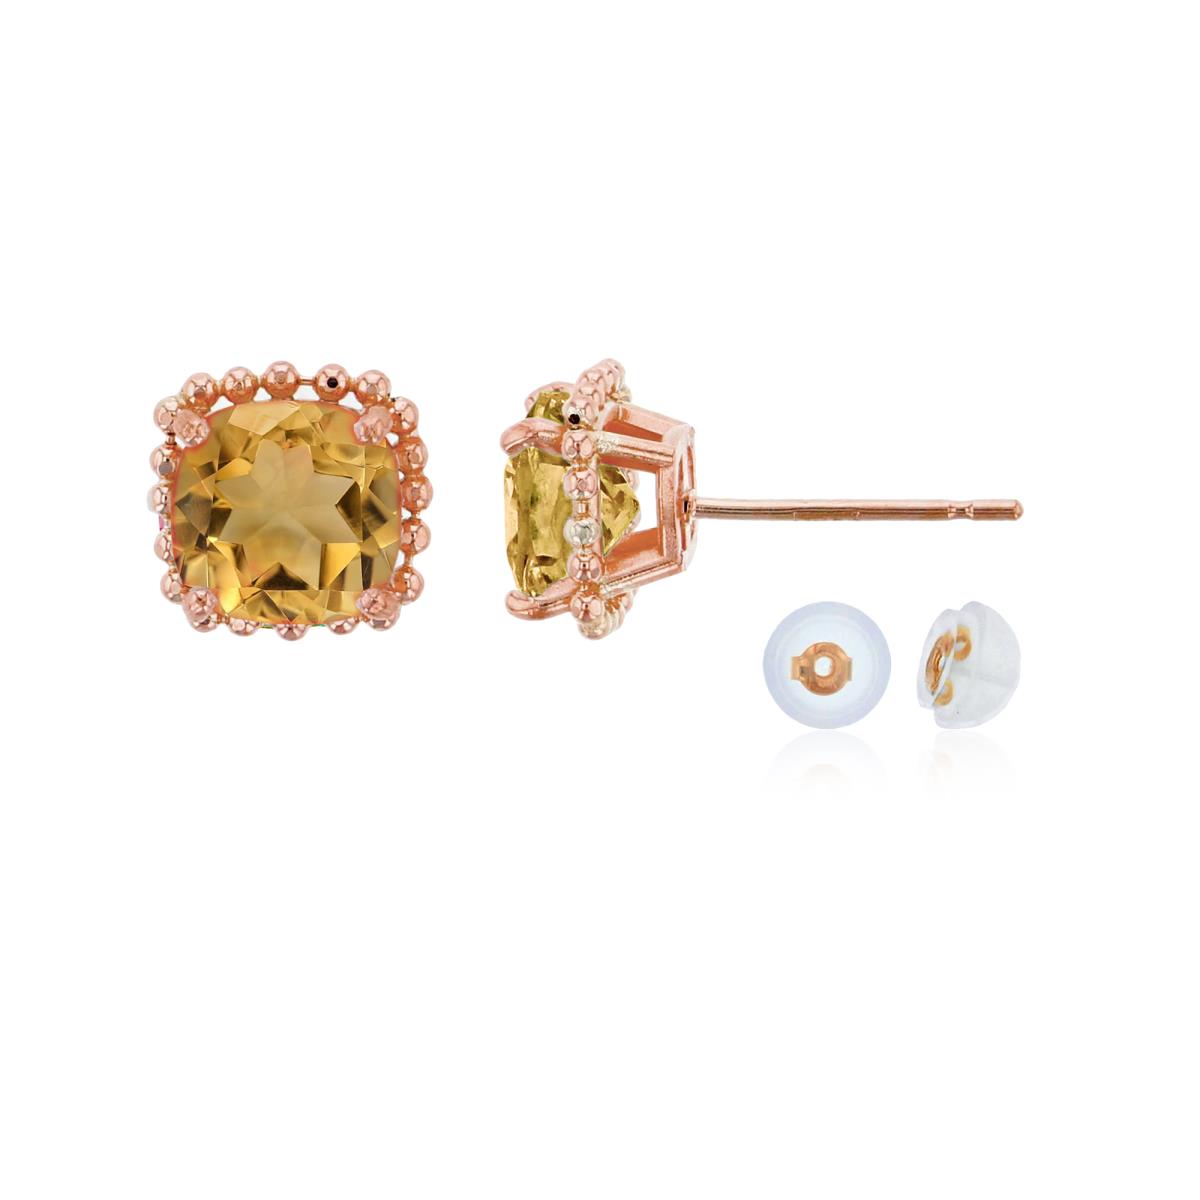 10K Rose Gold 6x6mm Cushion Cut Citrine Bead Frame Stud Earring with Silicone Back